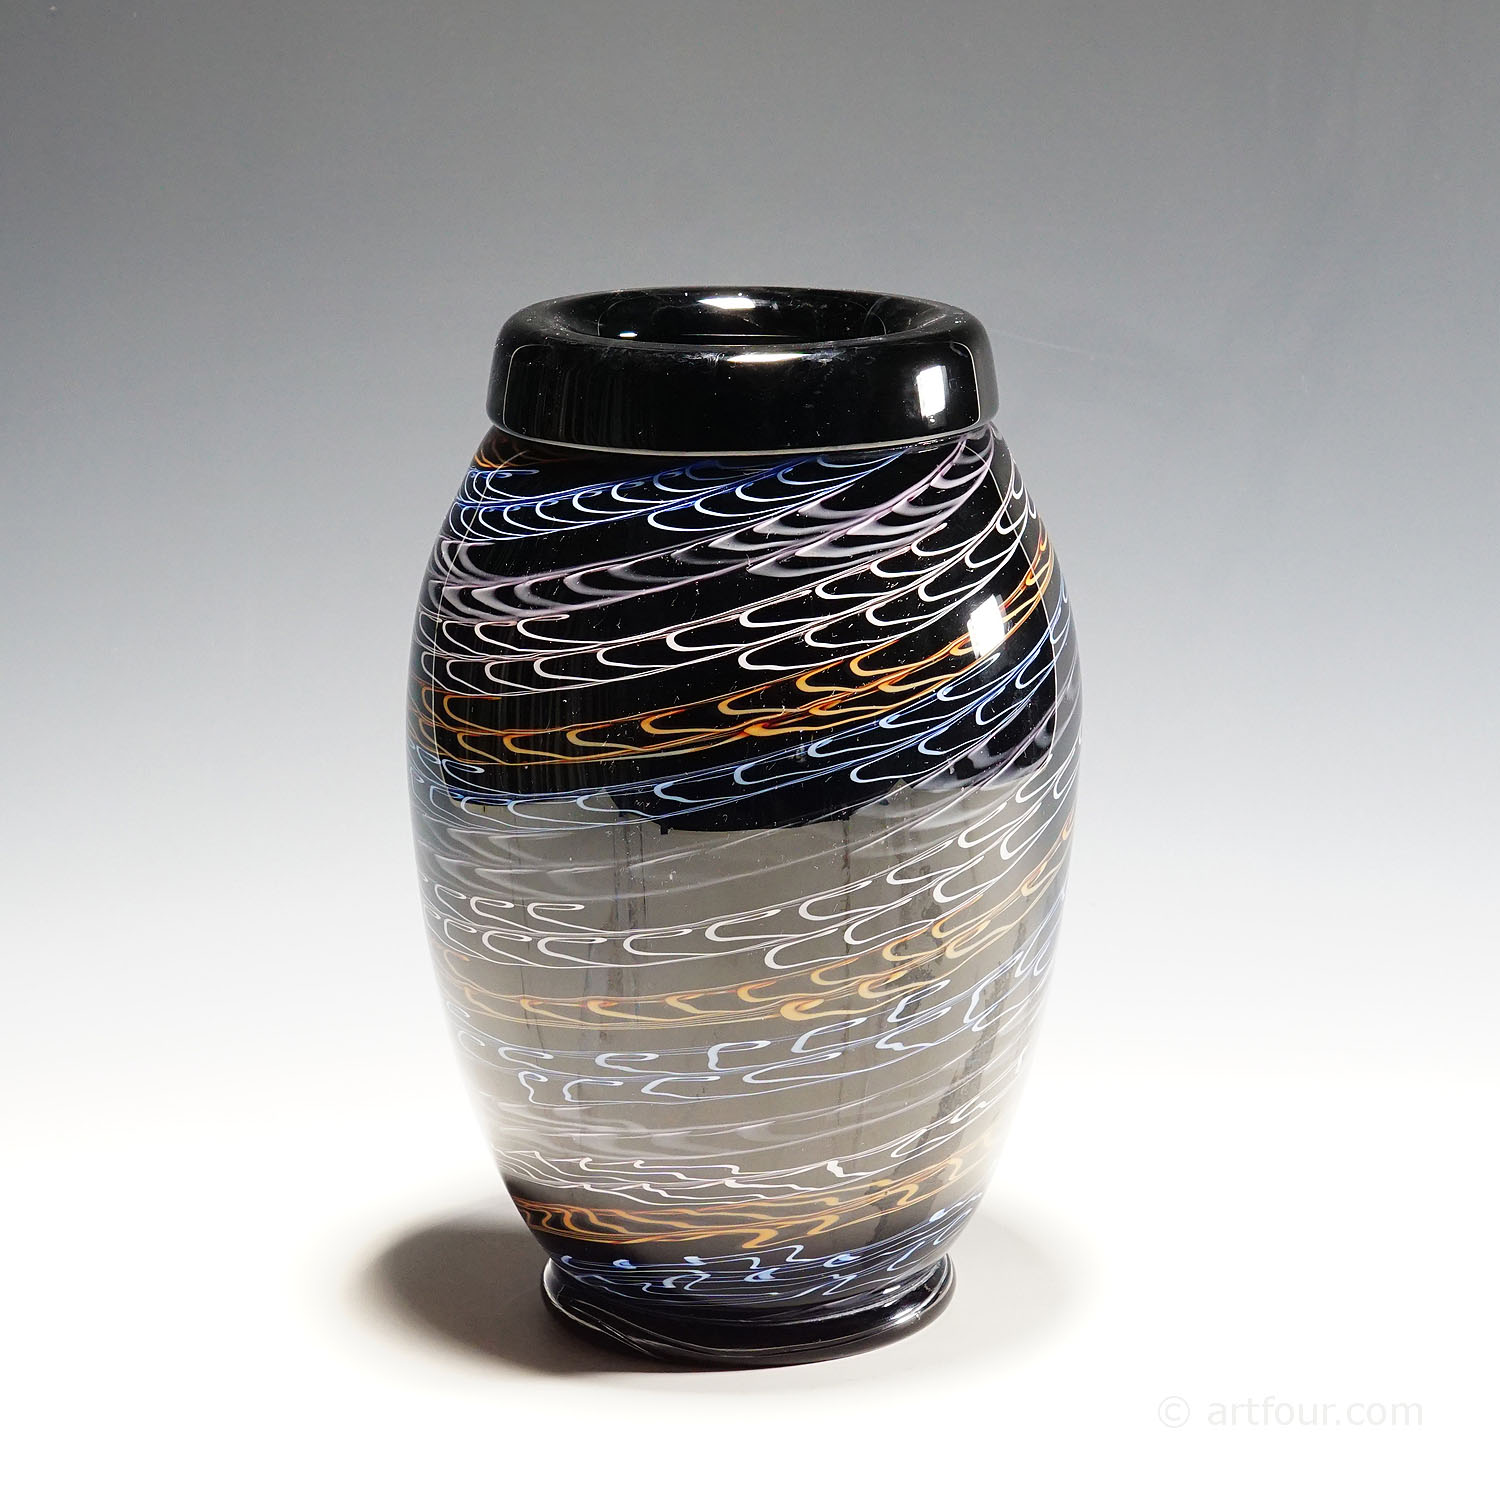 Large Murano Art Glass Vase by Master Paolo Crepax 1990s